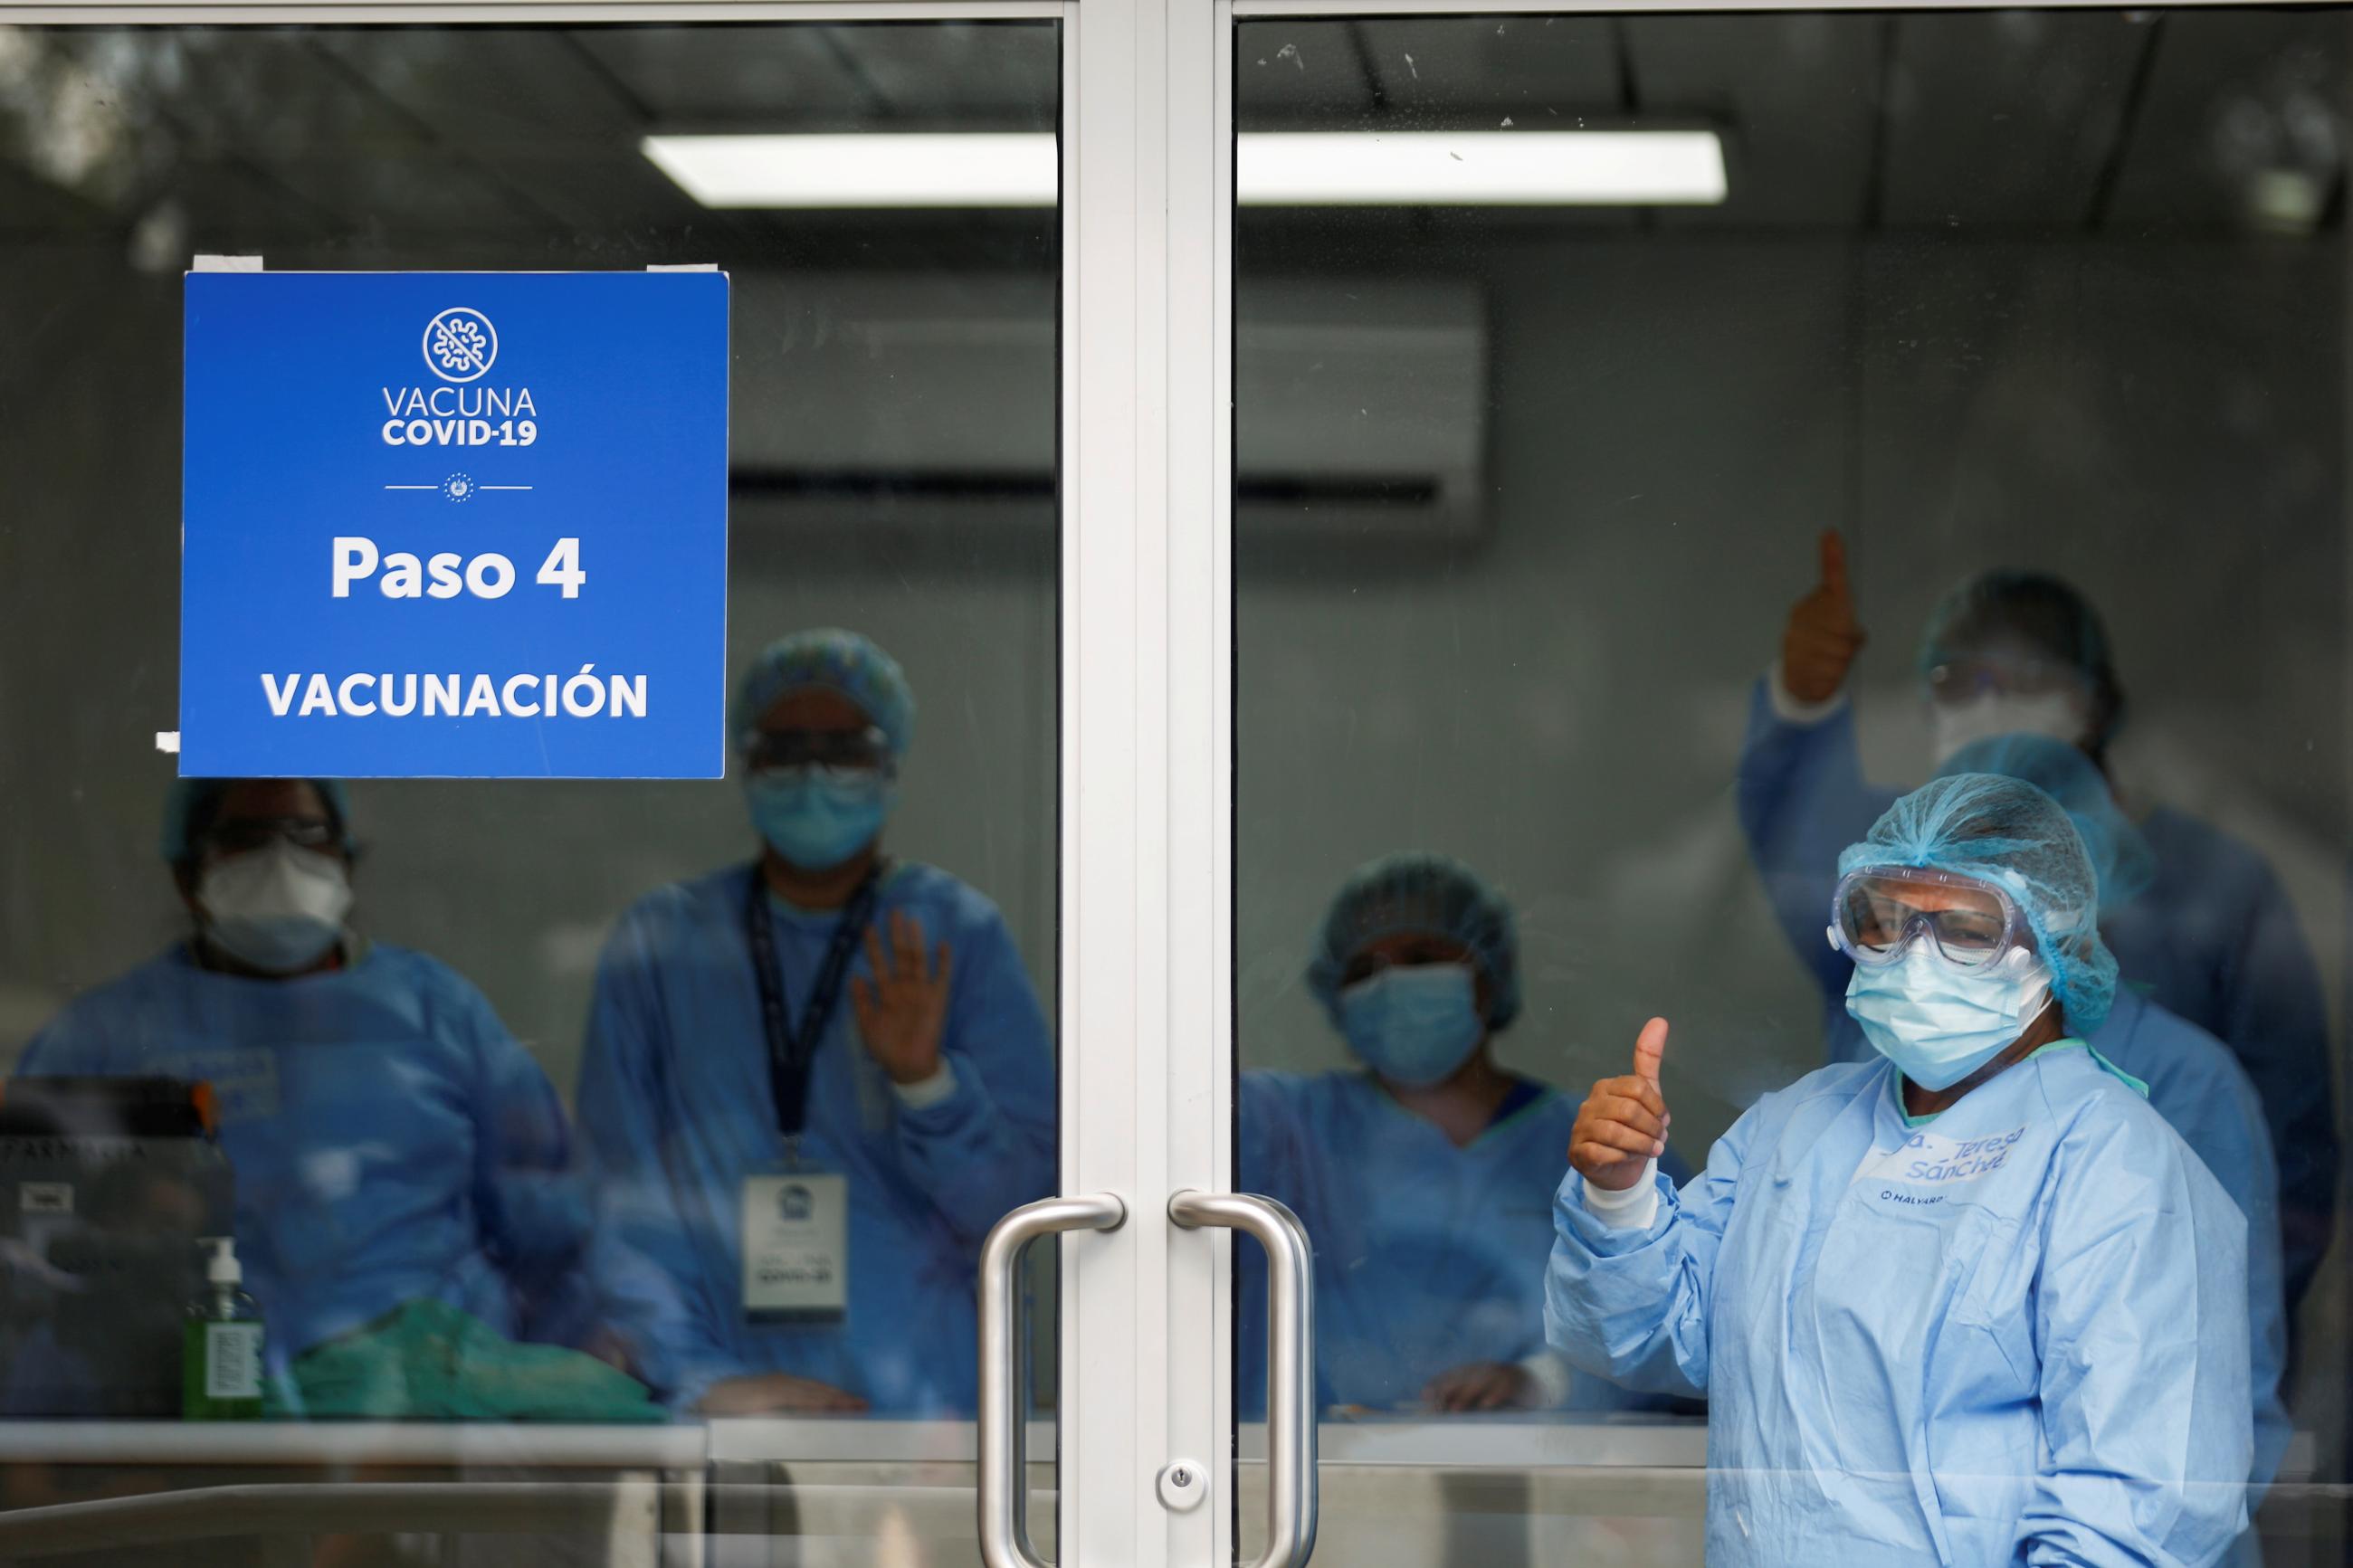 Health workers watch a news conference after administering doses of the AstraZeneca (SKBio Corea) COVID-19 vaccine under the COVAX scheme at a public health center in San Salvador, El Salvador on March 12, 2021.